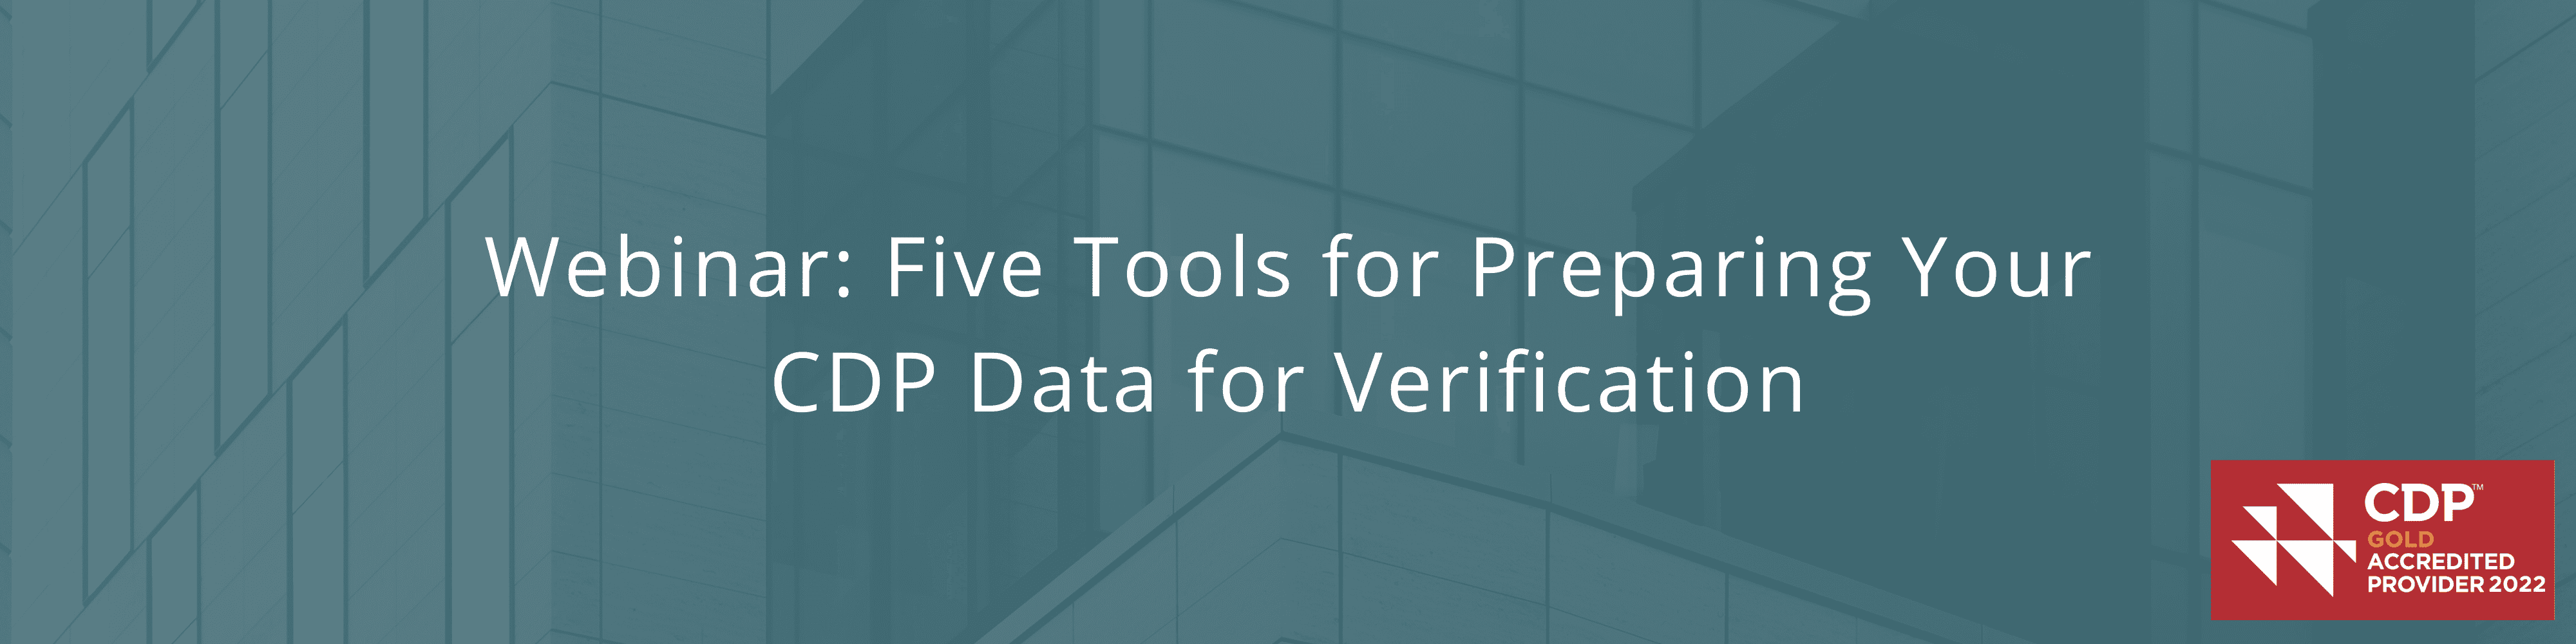 Five Tools for Preparing Your CDP Data for Verification